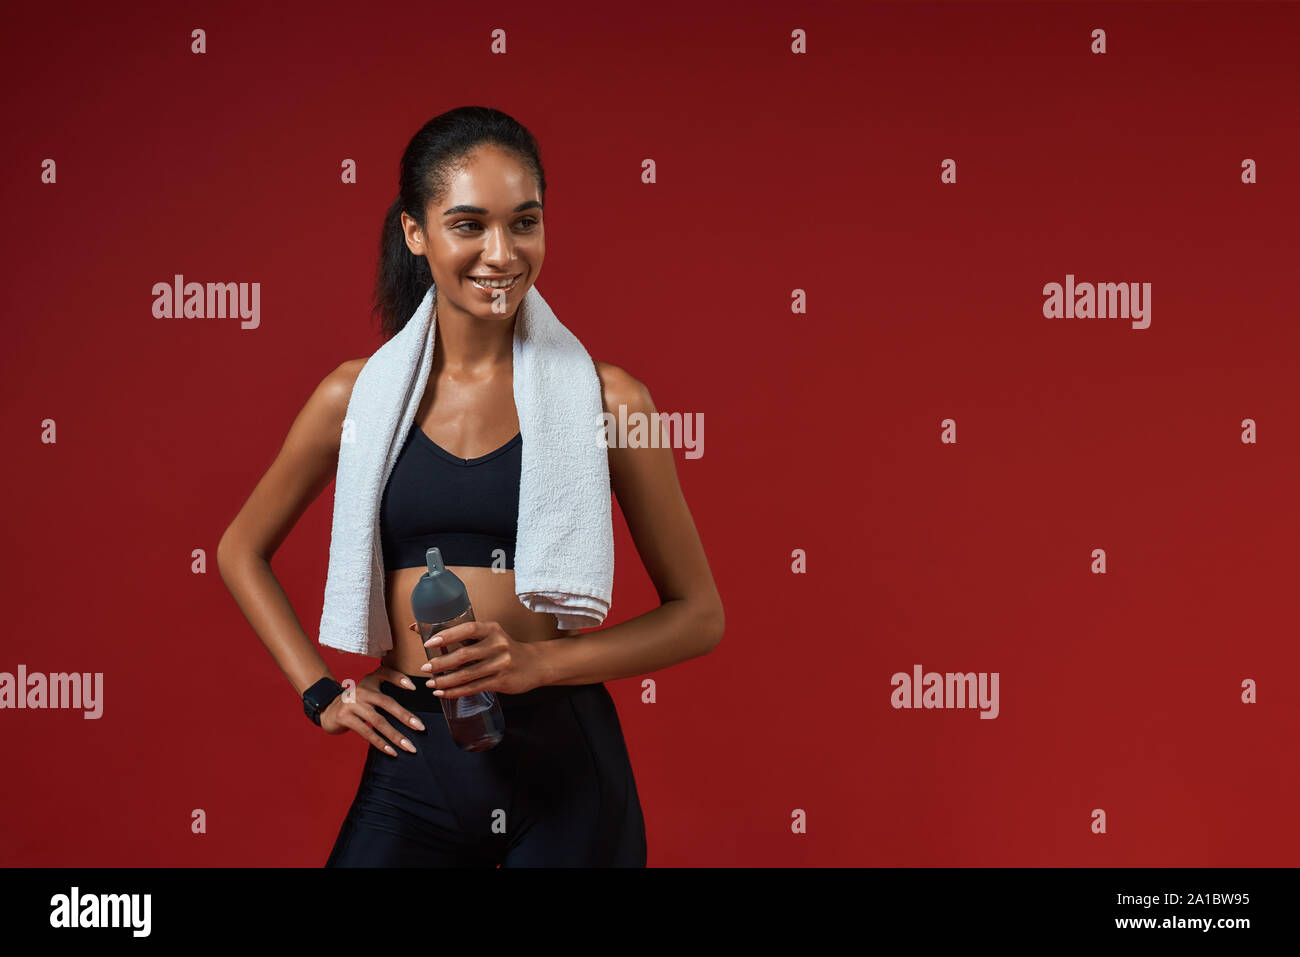 Cheerful afro american woman in sports clothing with towel on her shoulders holding bottle of water and smiling while standing against red background. Sport concept. Active lifestyle Stock Photo